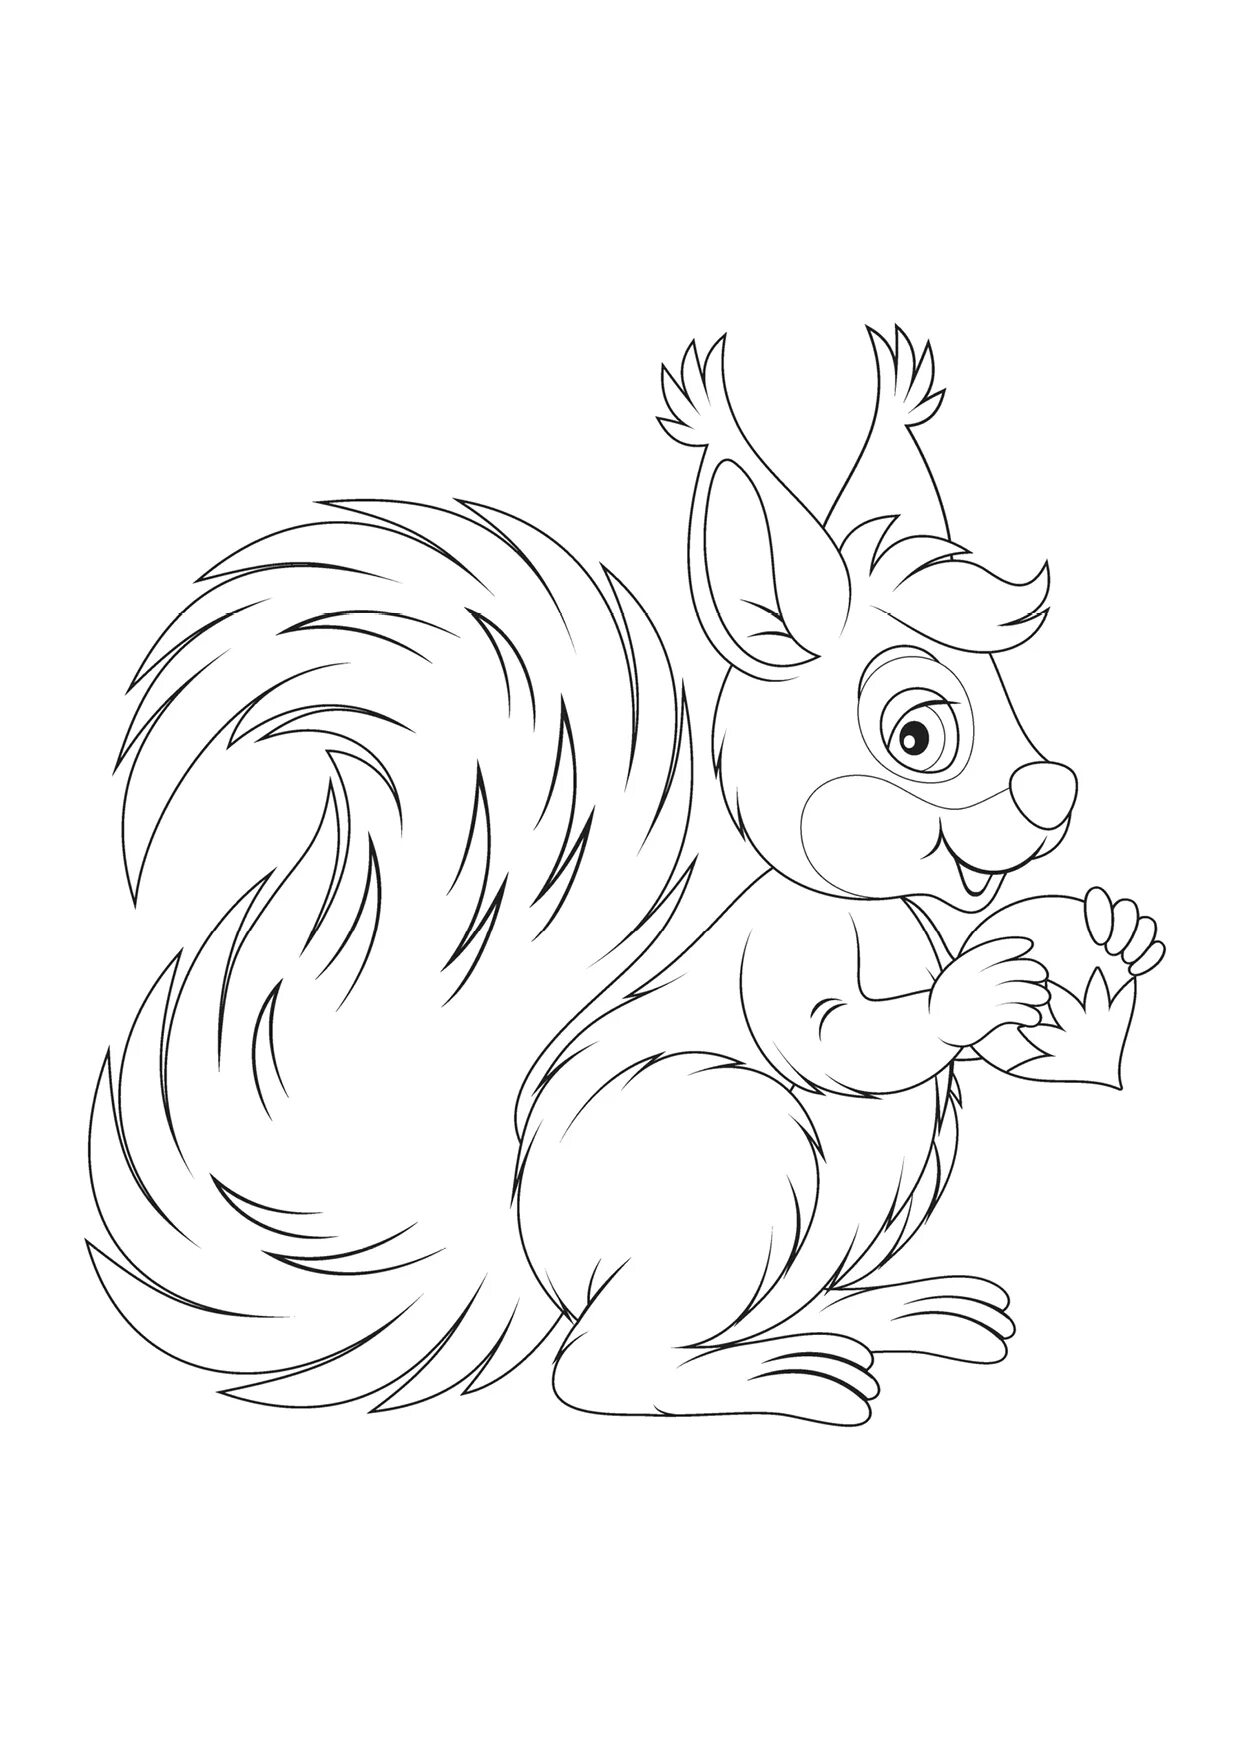 Color live coloring squirrel for children 6-7 years old